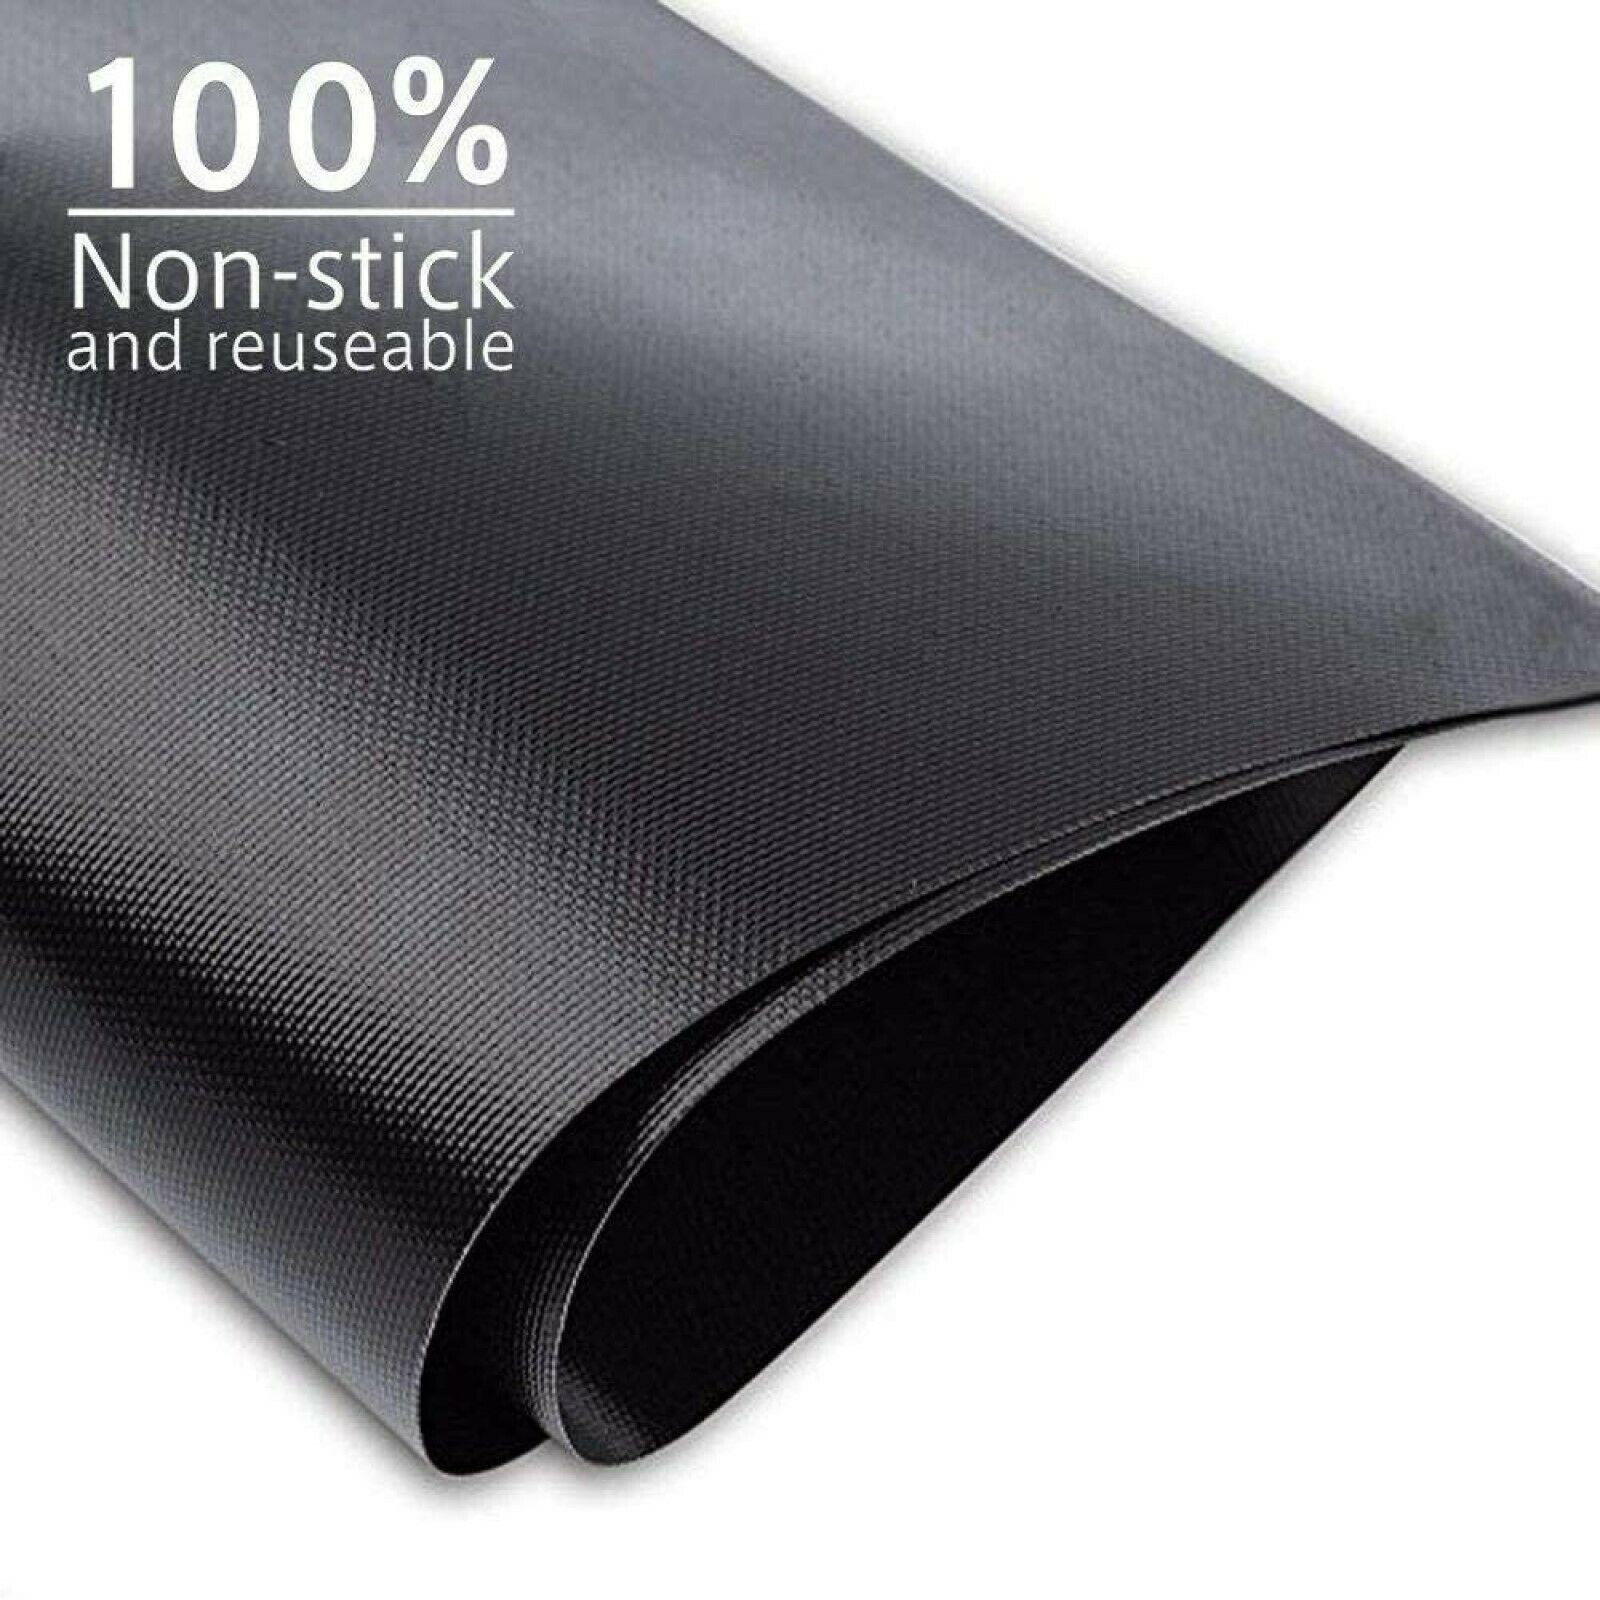 Heavy Duty Oven Liner 40cm x 50cm Easy Clean Reusable Non-Stick Dishwasher Safe 